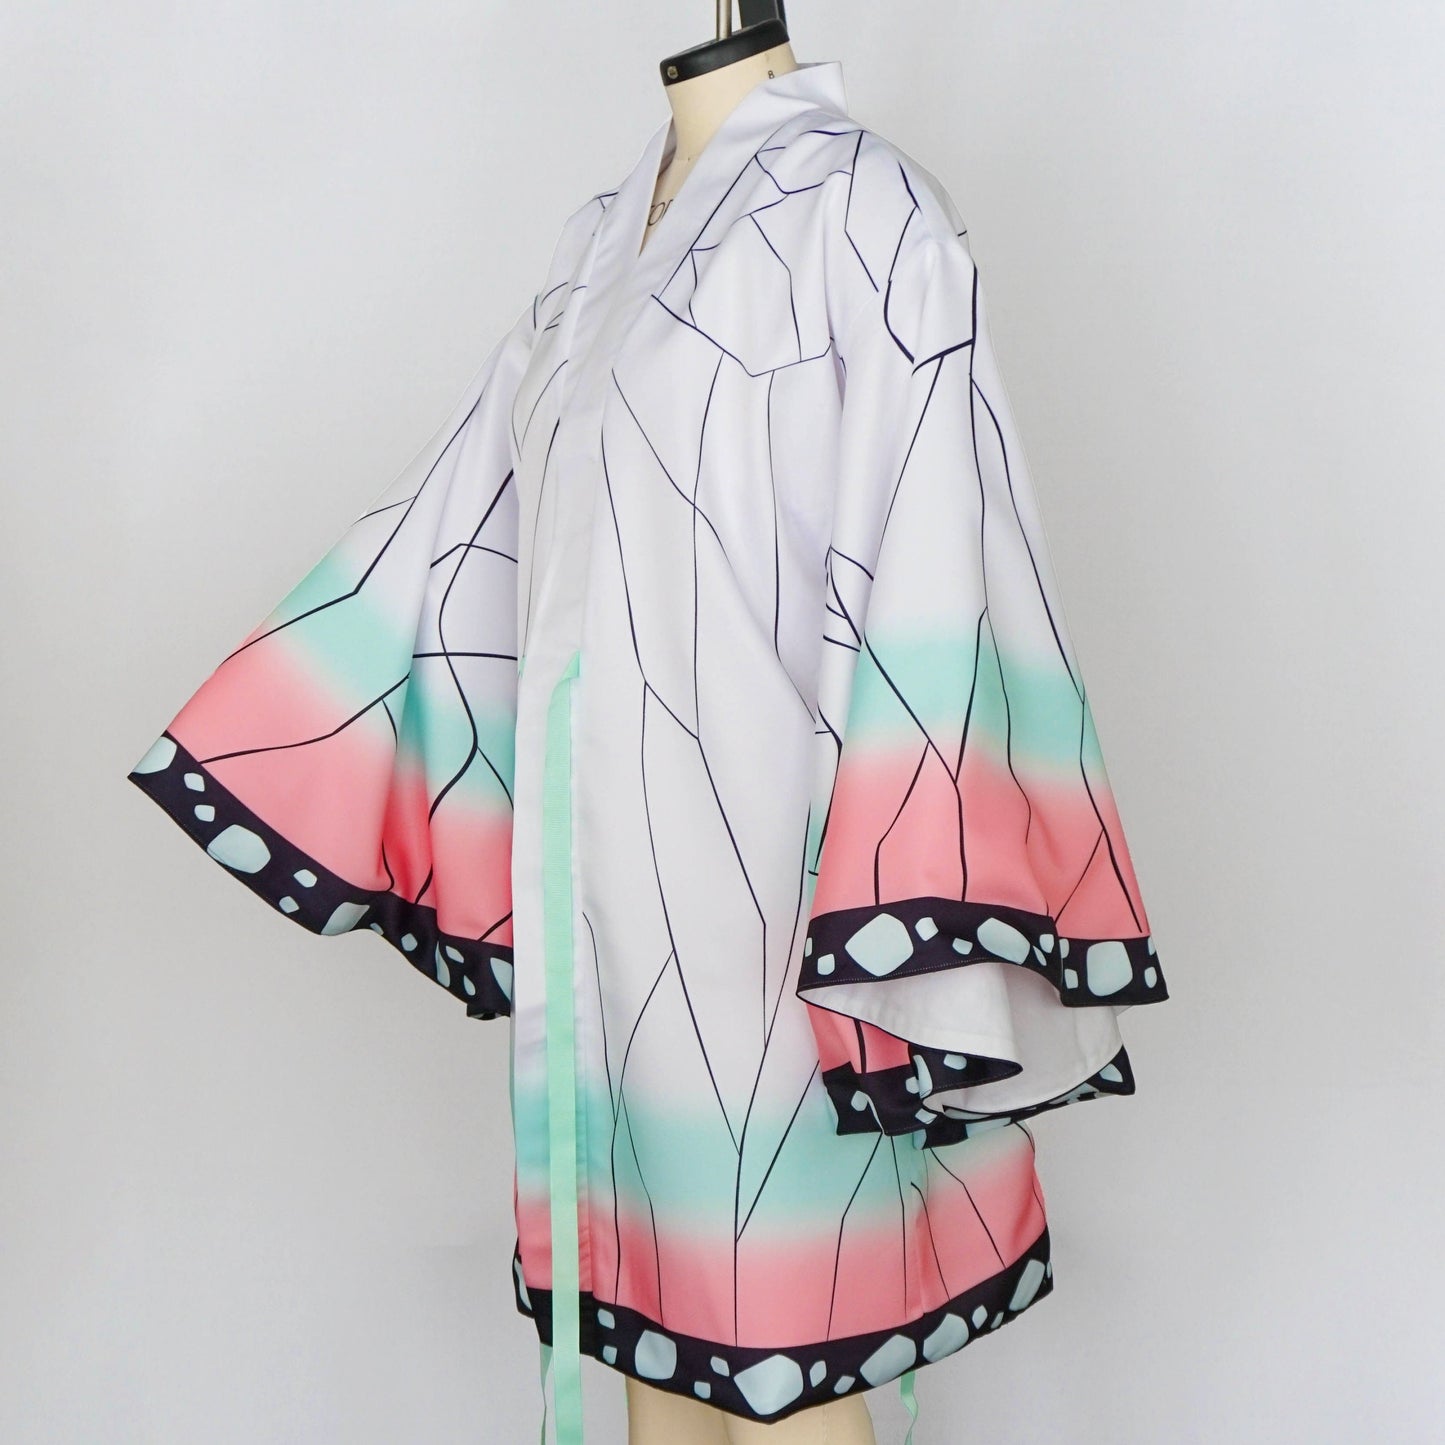 Long Kimono Lined Sewing Pattern/Downloadable PDF File and Tutorial Book